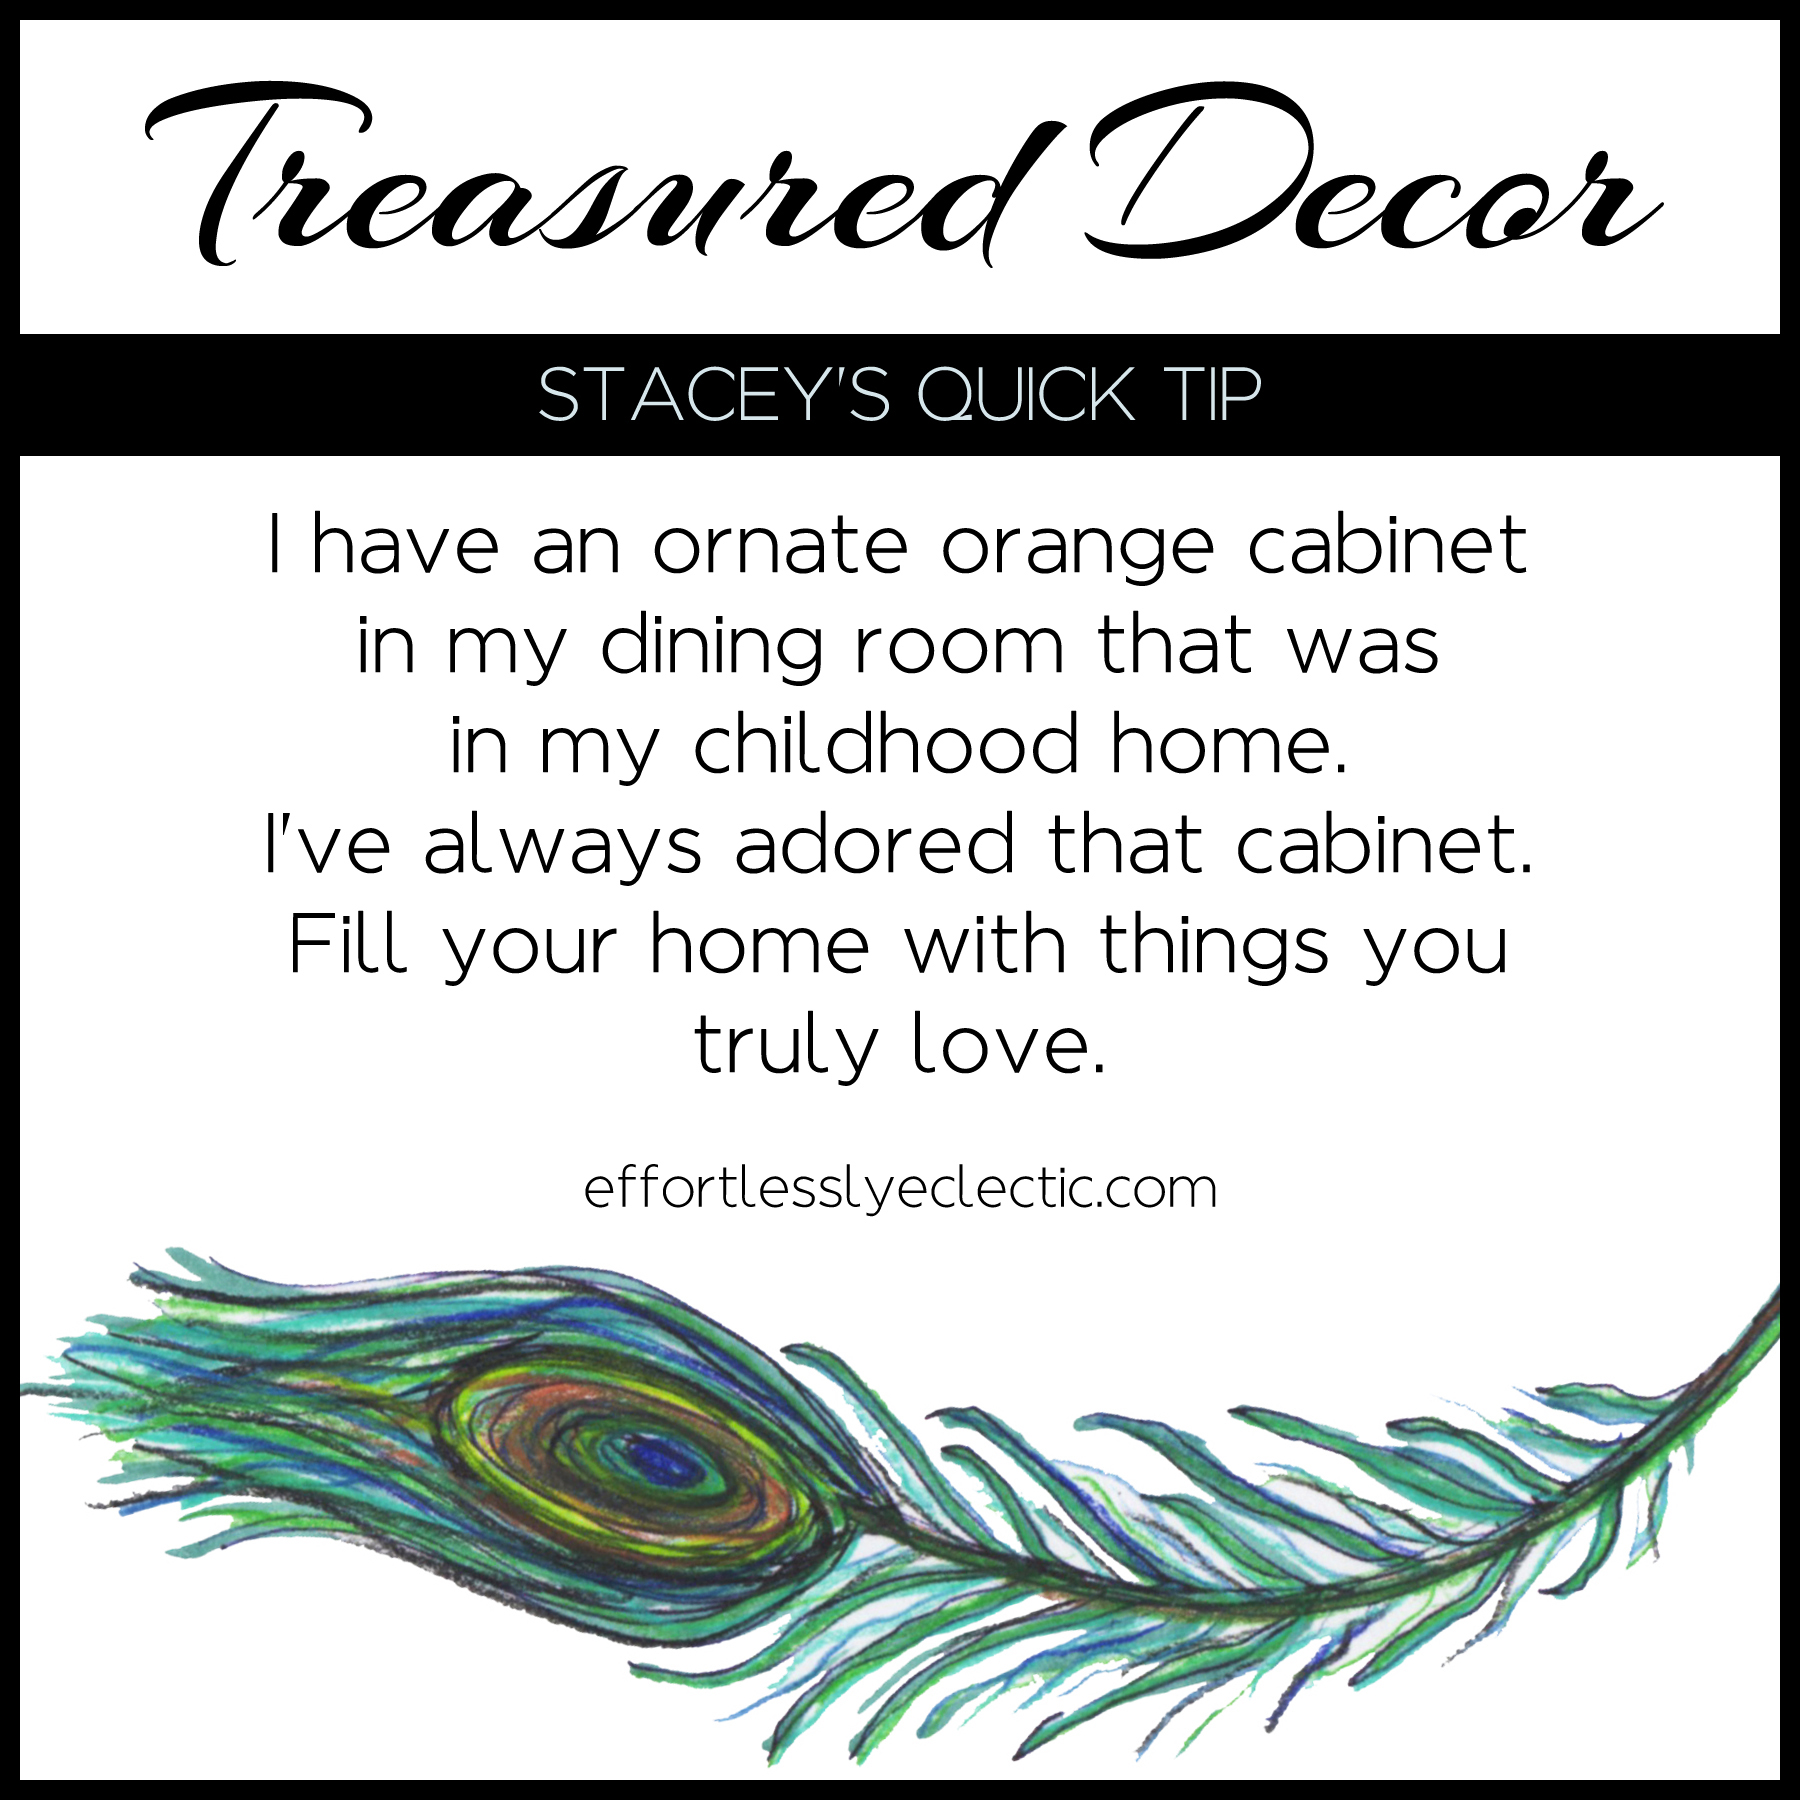 Treasured Decor - A home decorating tip about creating a home with meaning